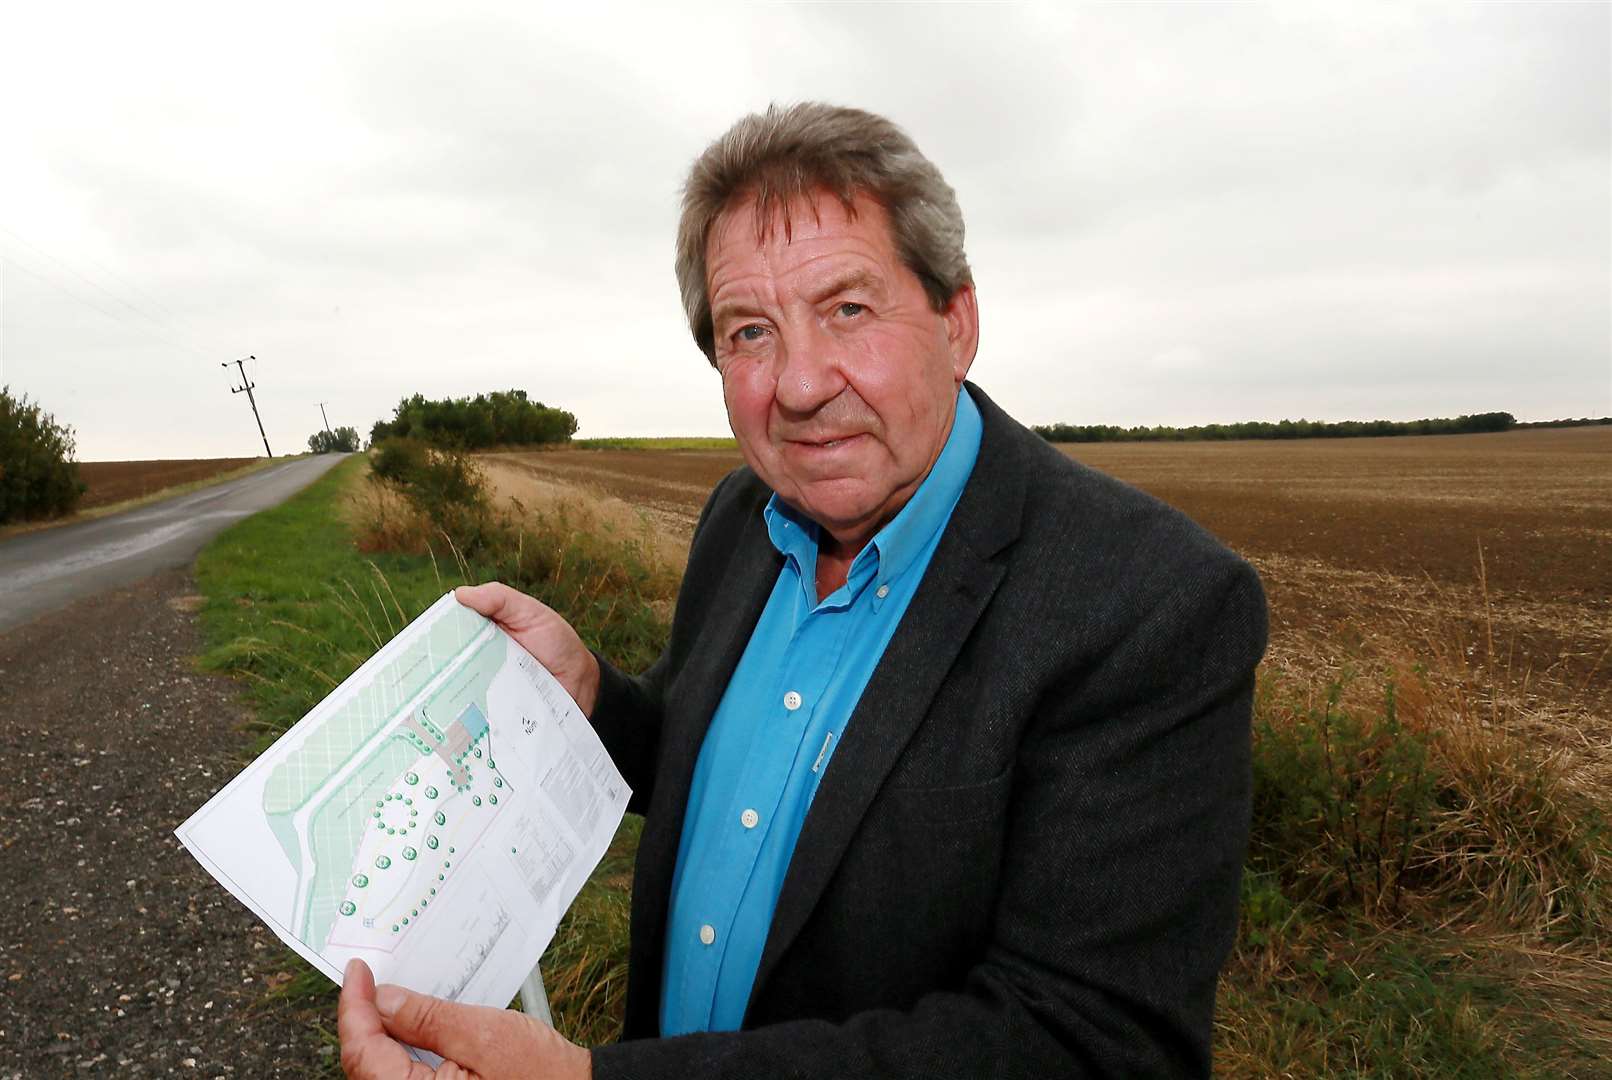 MP Gordon Henderson at the new Sheppey Natural Burial Ground at Harty with the site drawings